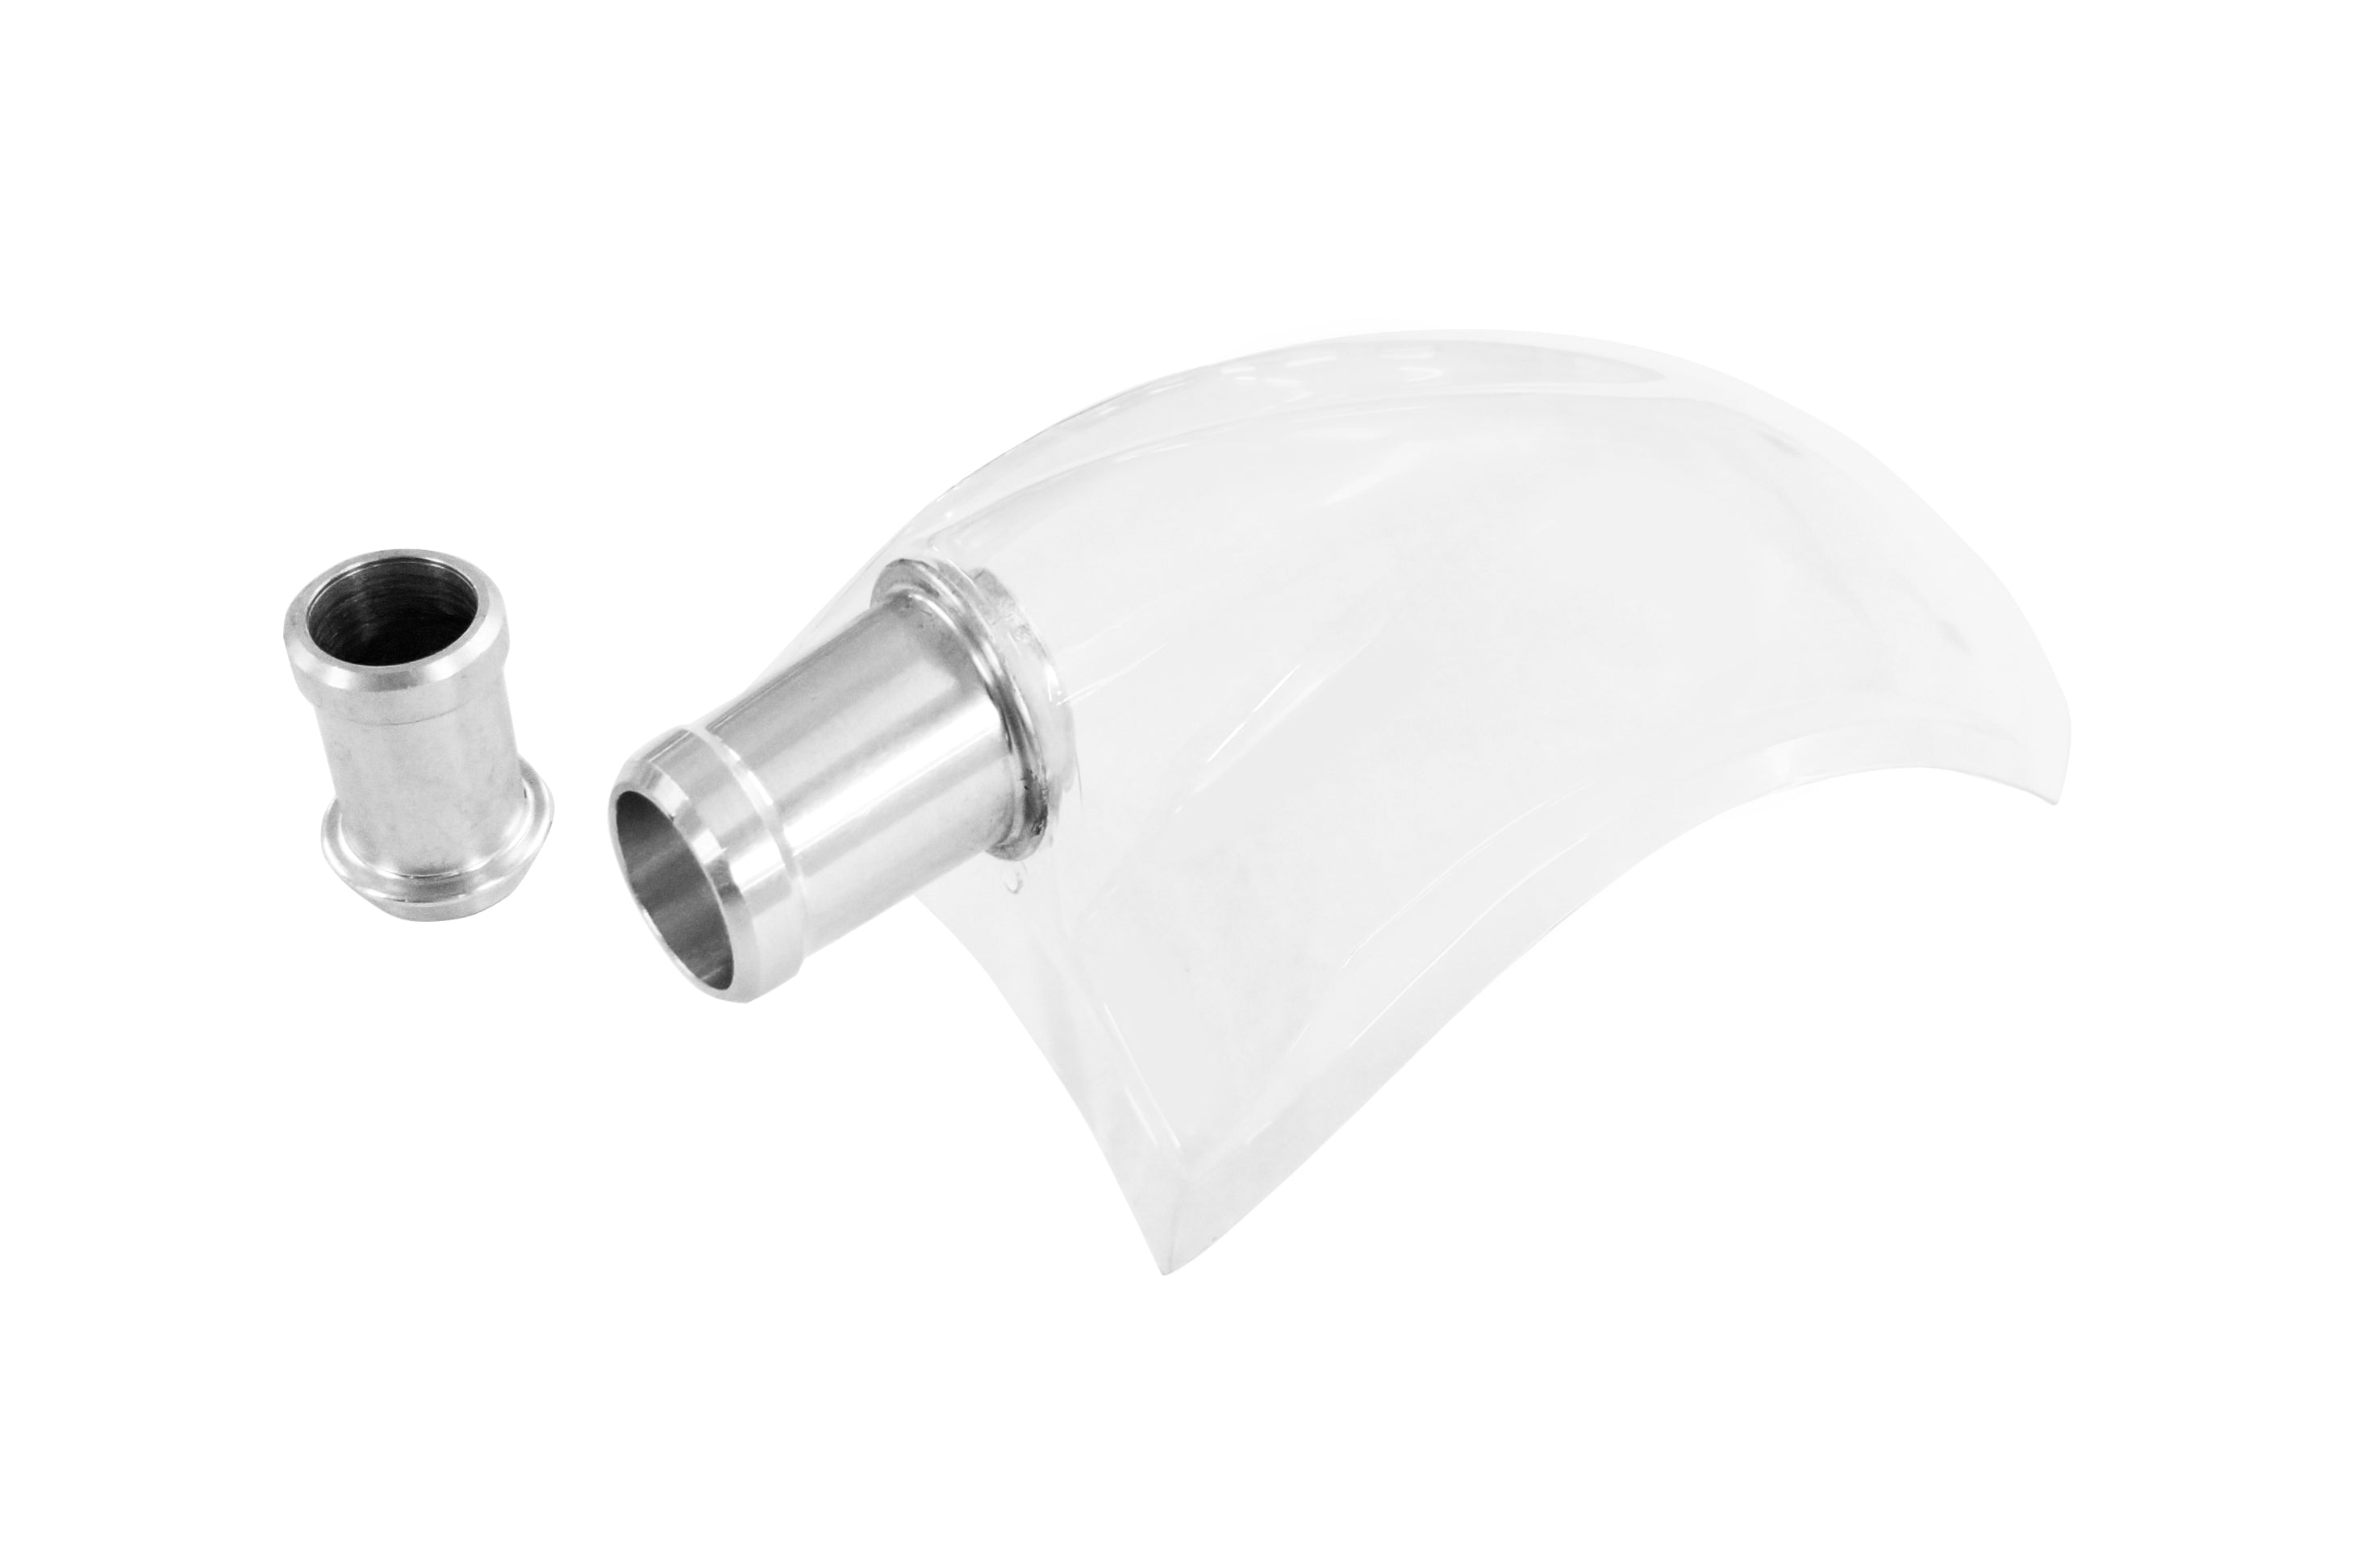 SCHUBERTH 1010008099 Flat Forced air scoop clear - Small Connector Prep. with tape SP1 Photo-1 